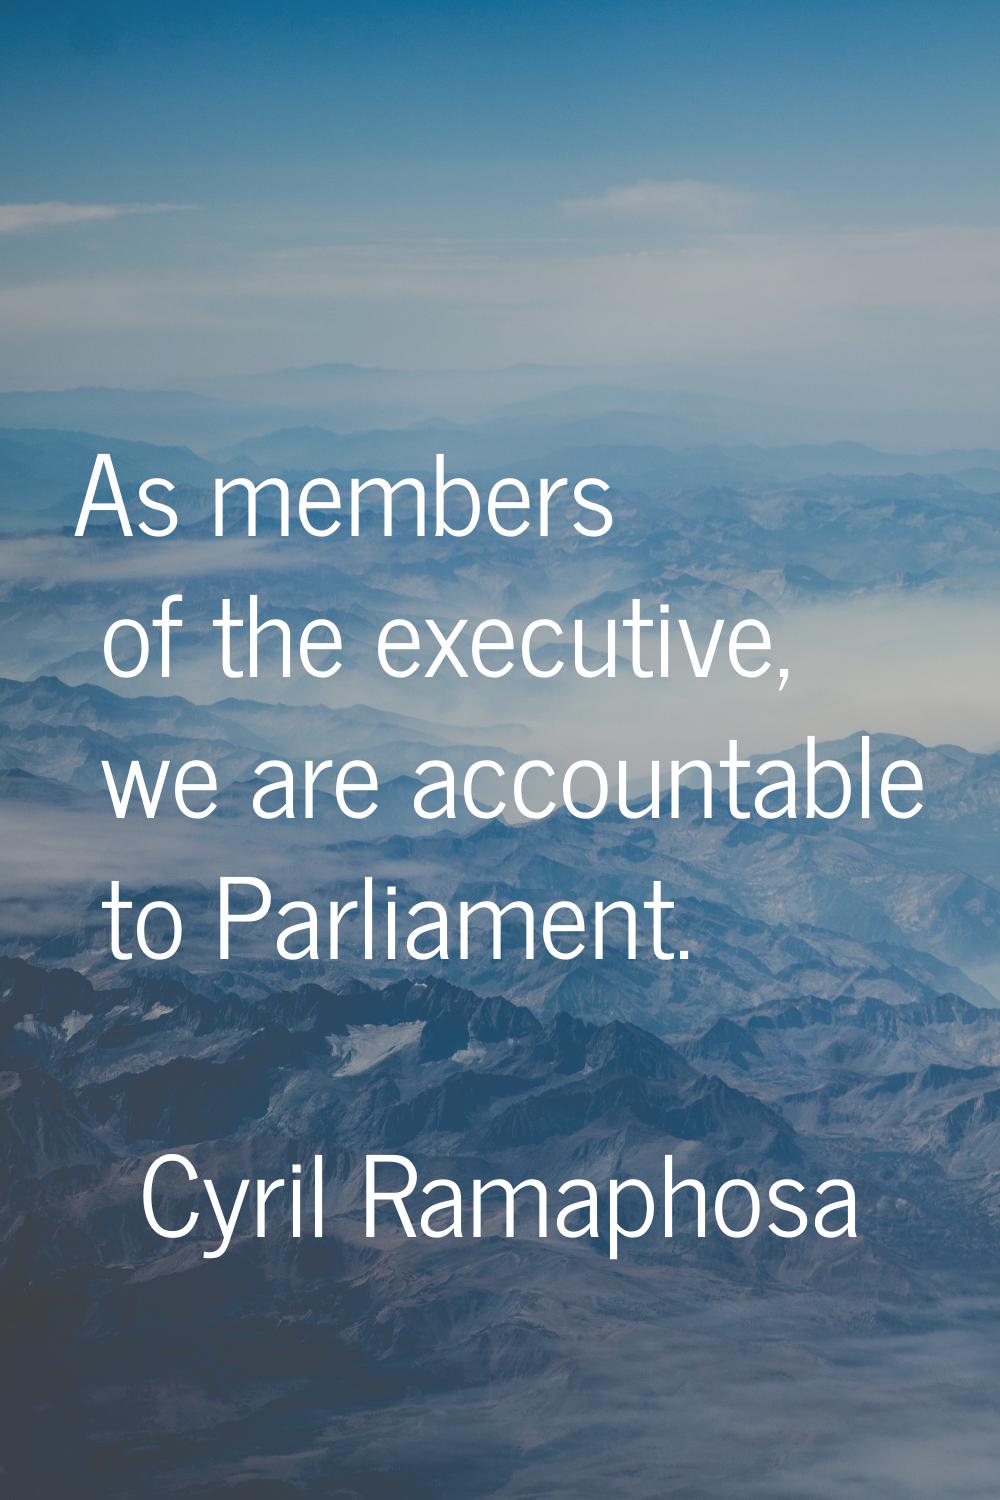 As members of the executive, we are accountable to Parliament.